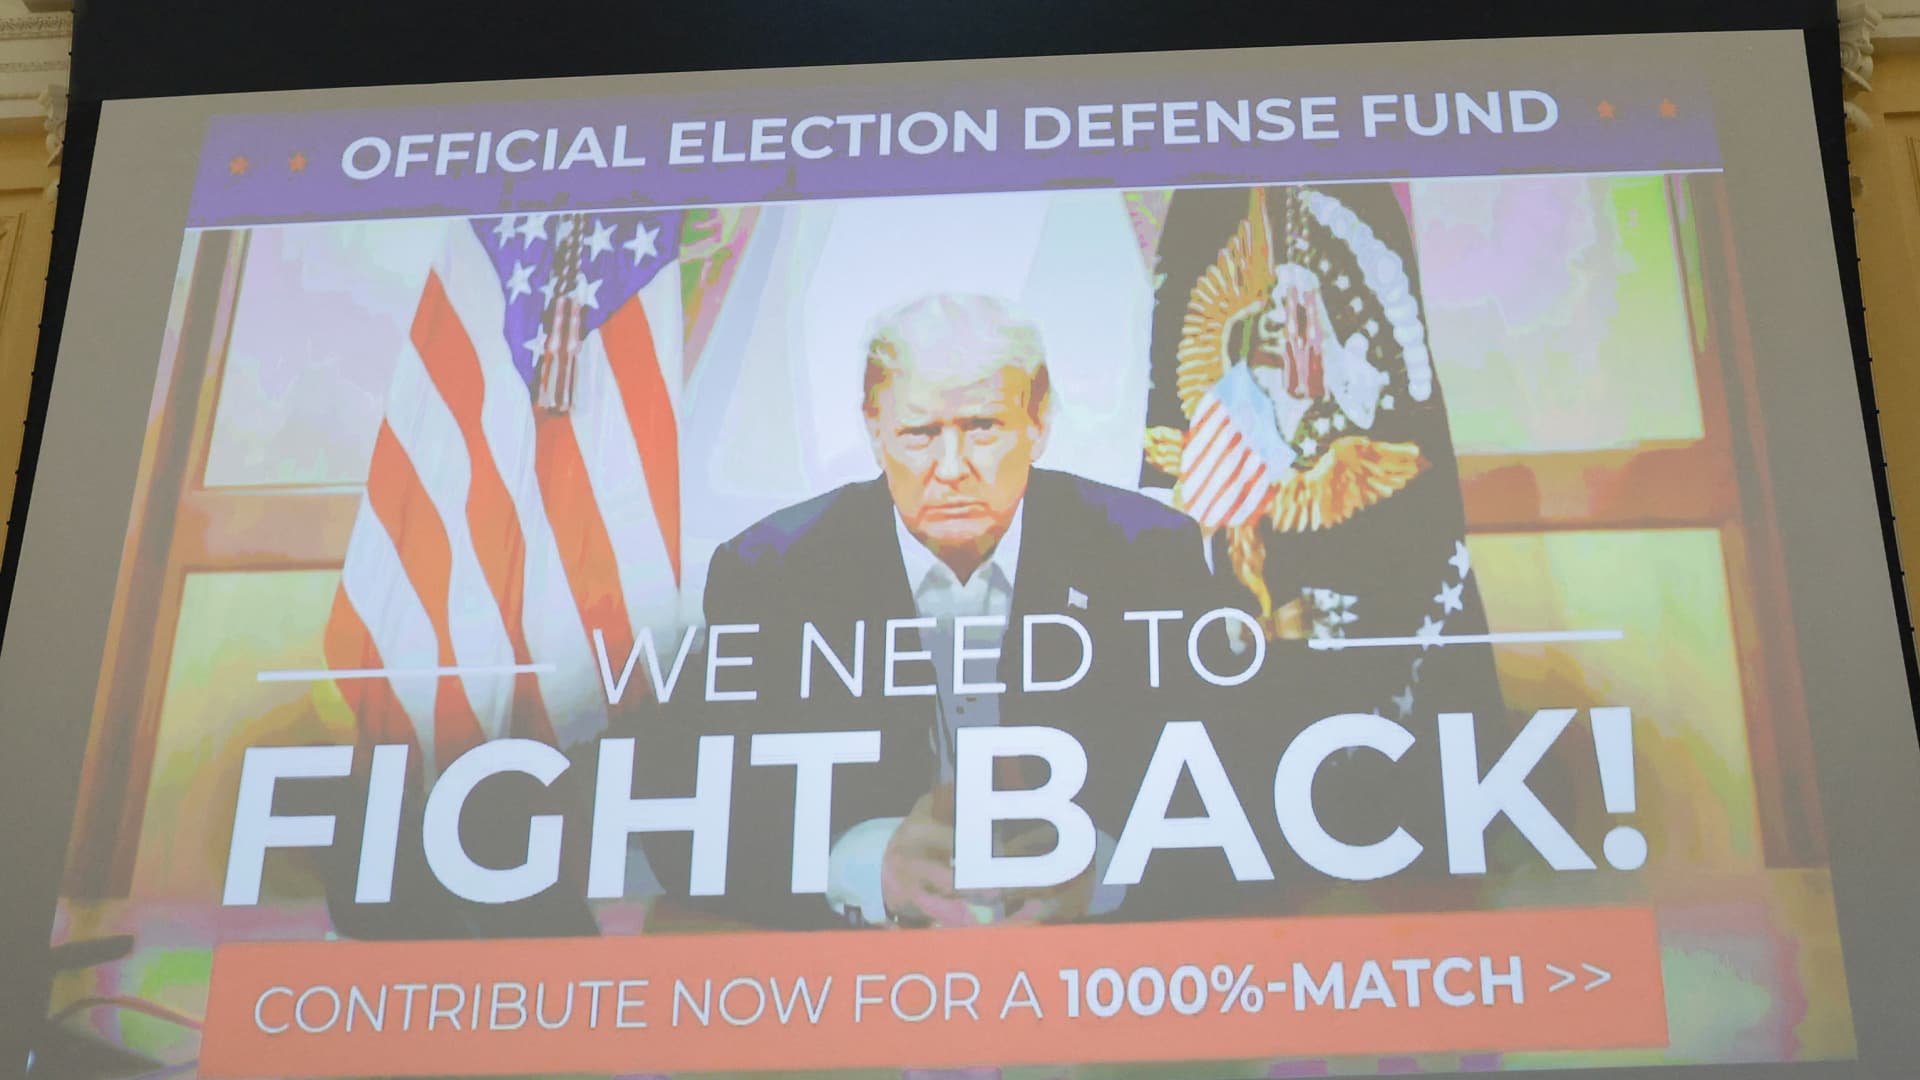 Trump campaign uses newly restored Facebook page to fundraise off indictment